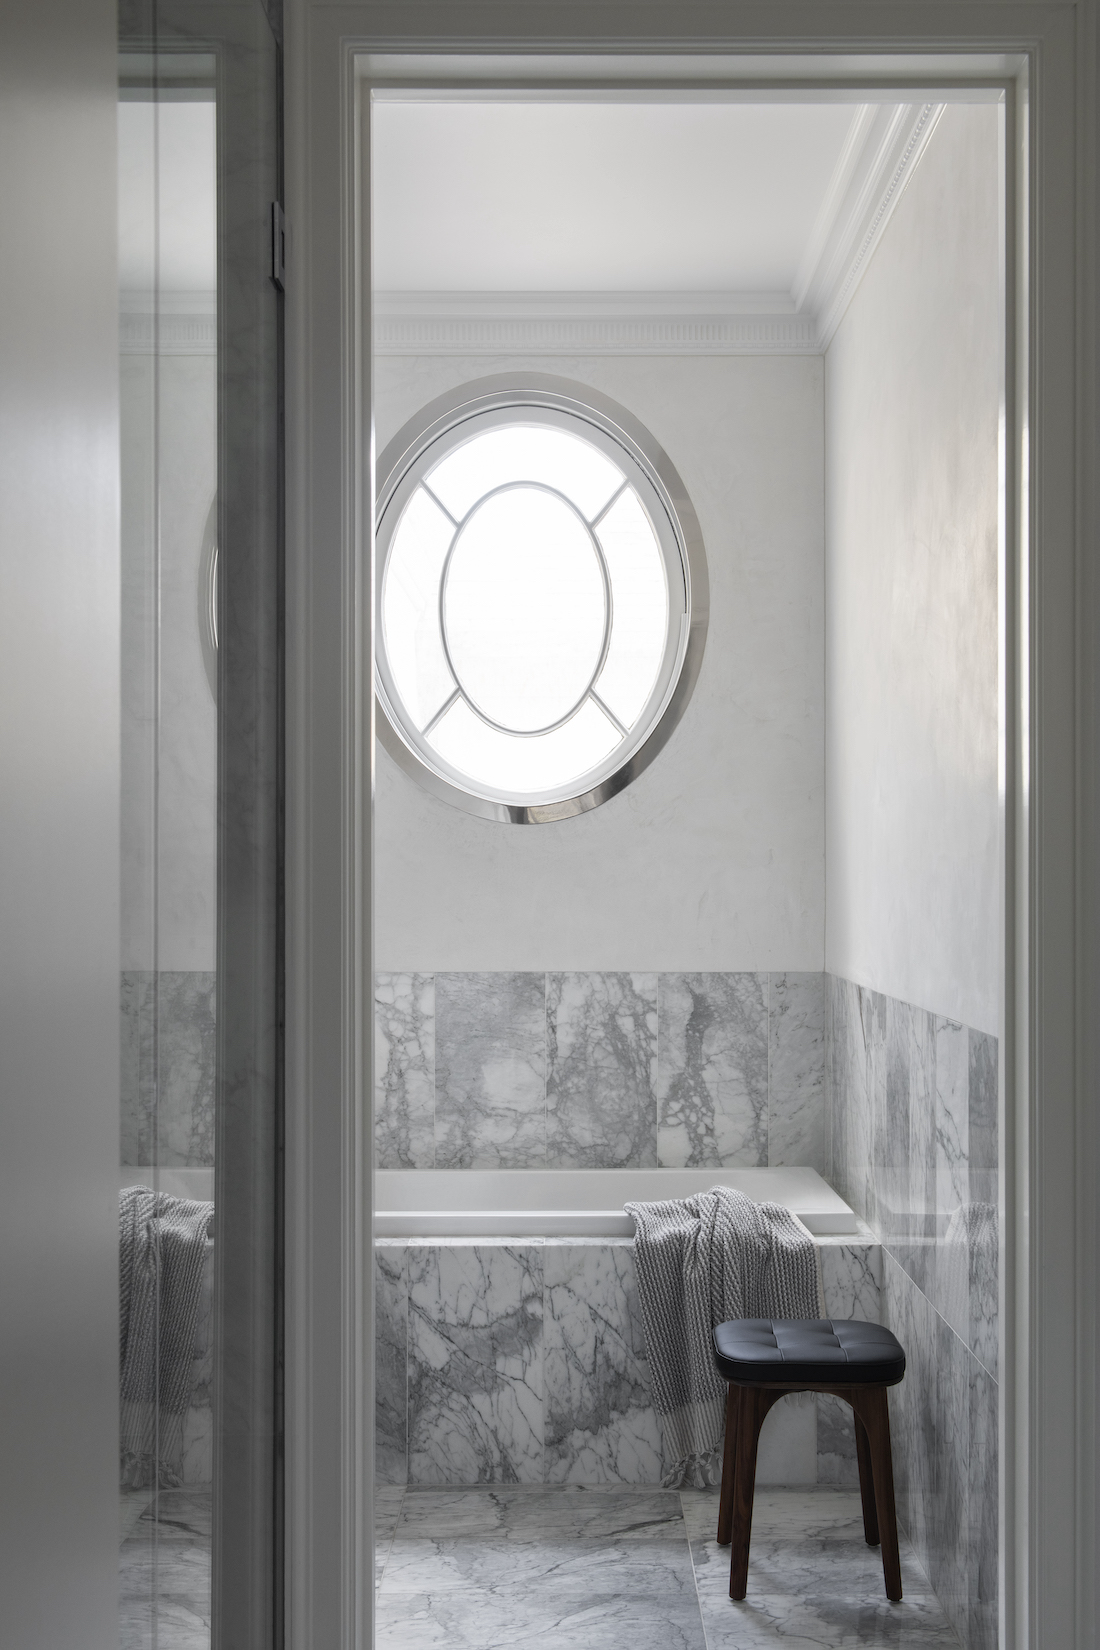 Transcontinental Residence marble bathroom with oval window